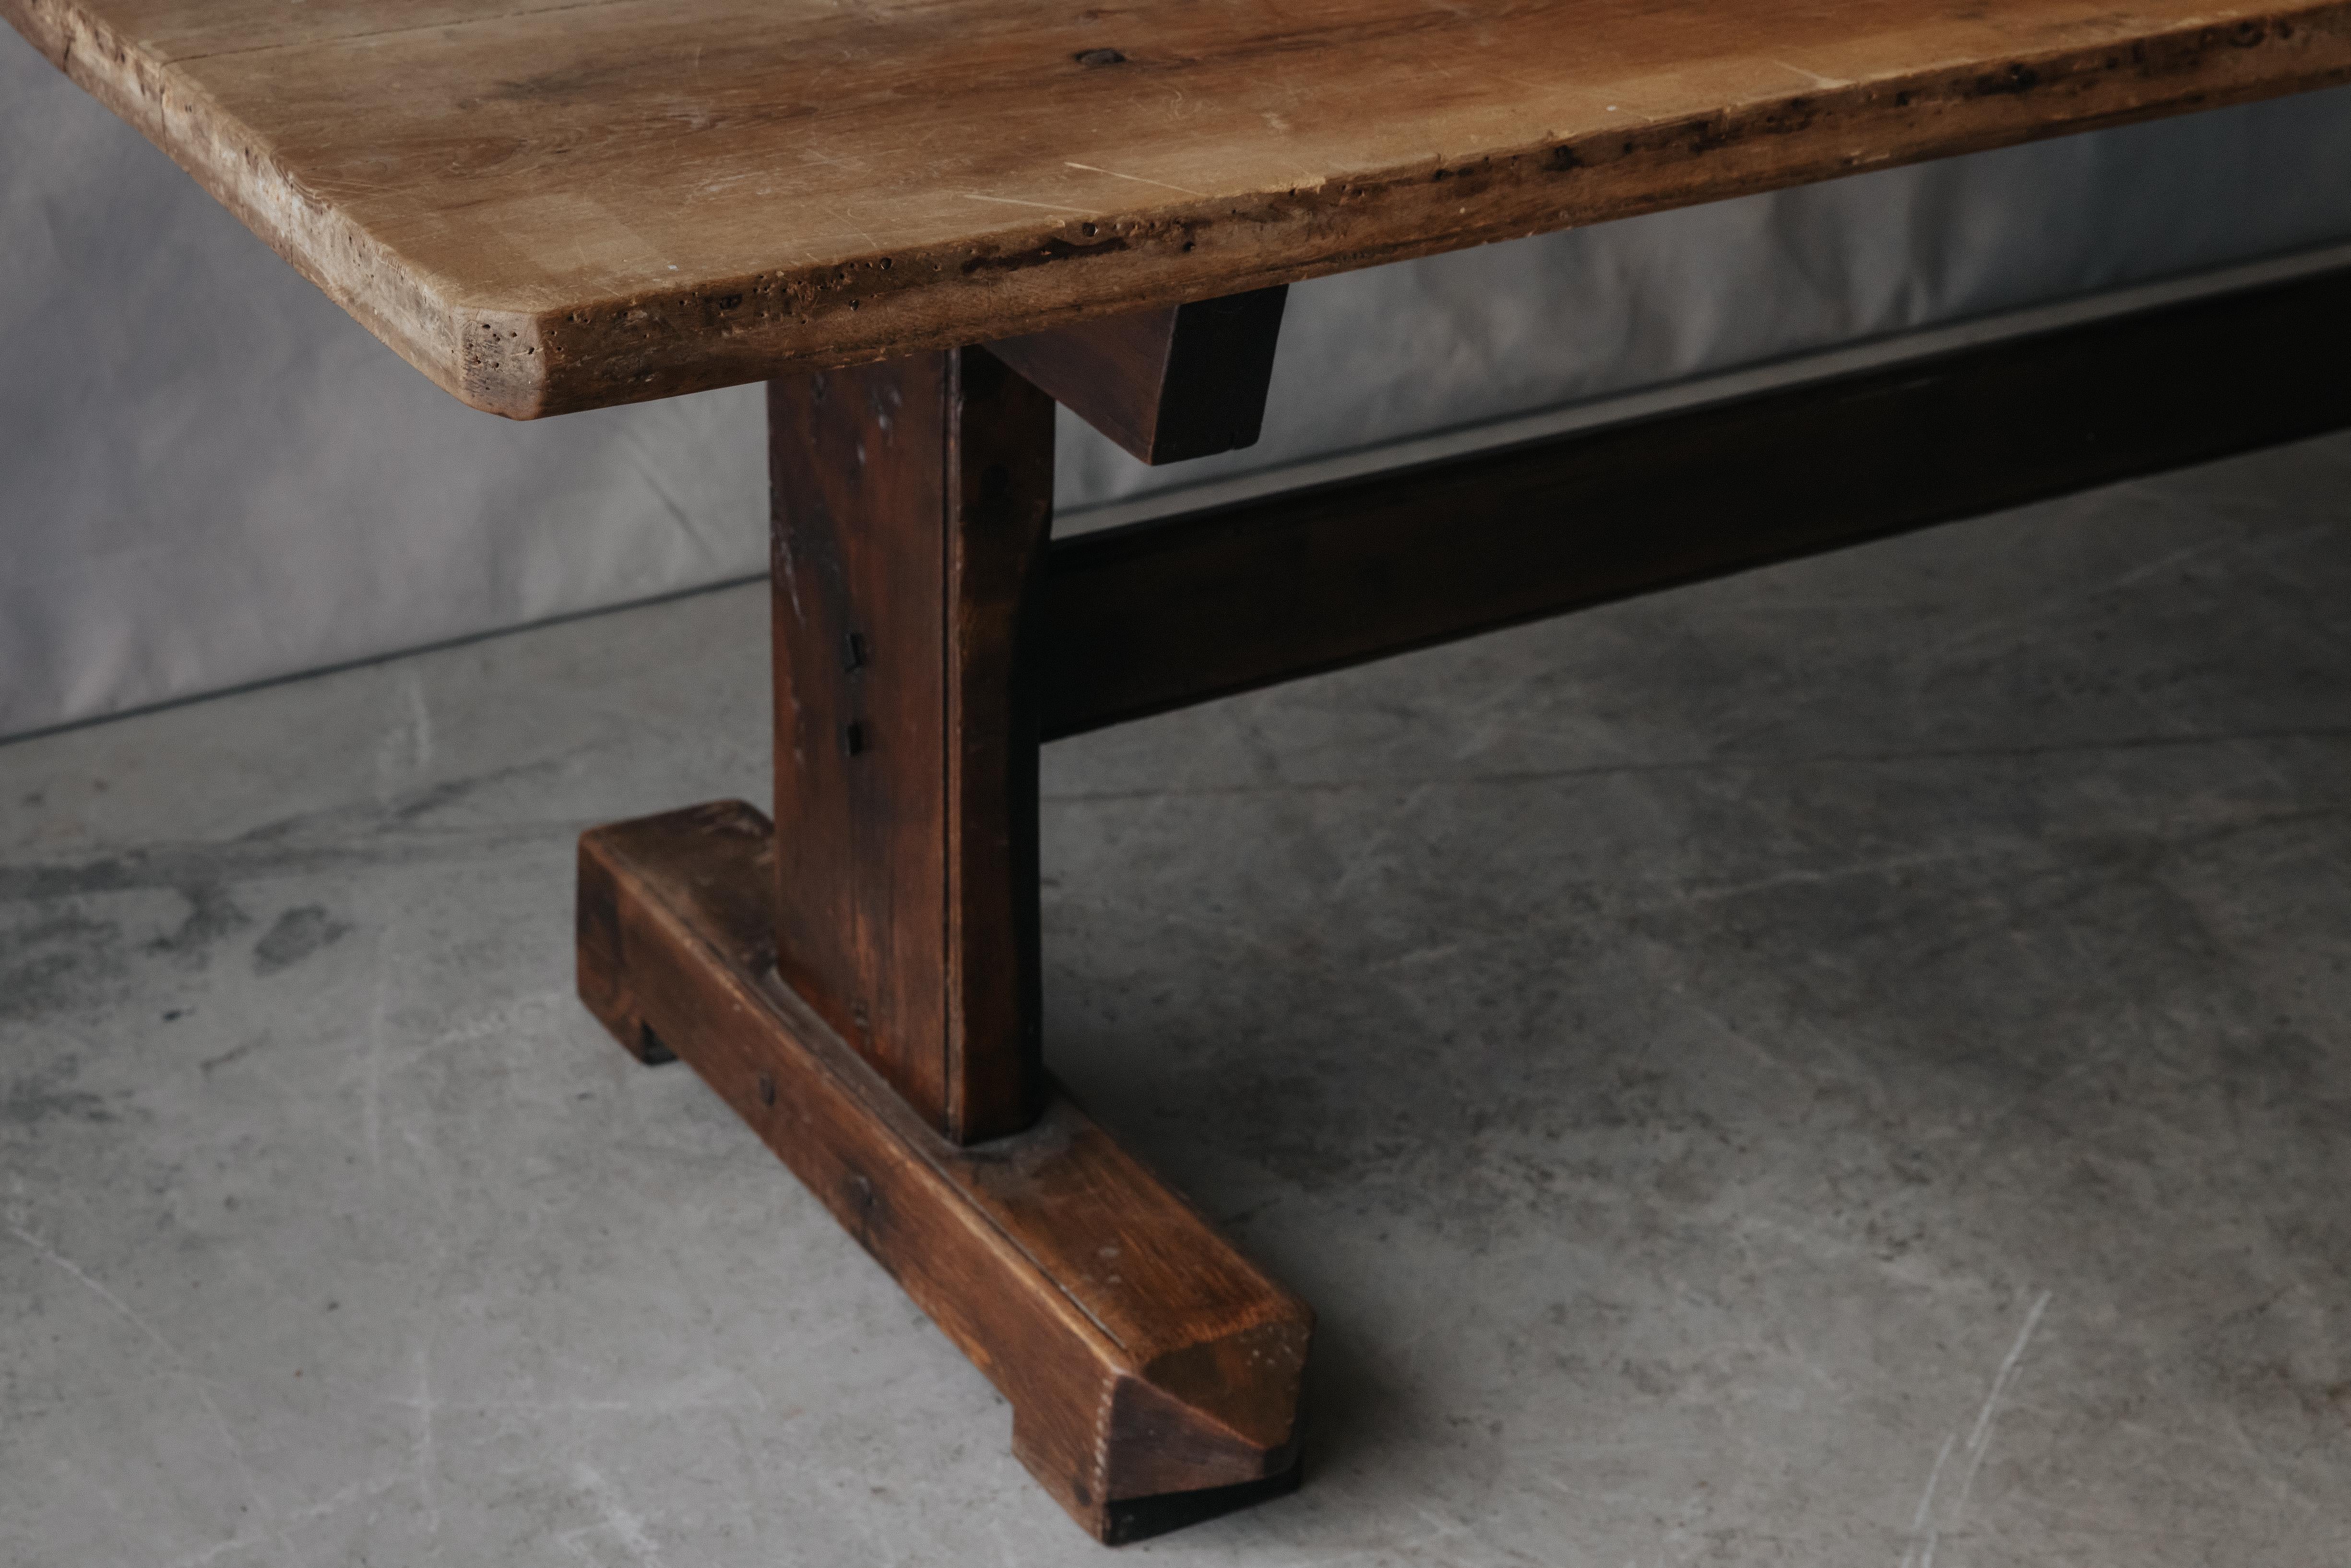 European Large Oak Monastery Table From Italy, Circa 1880 For Sale